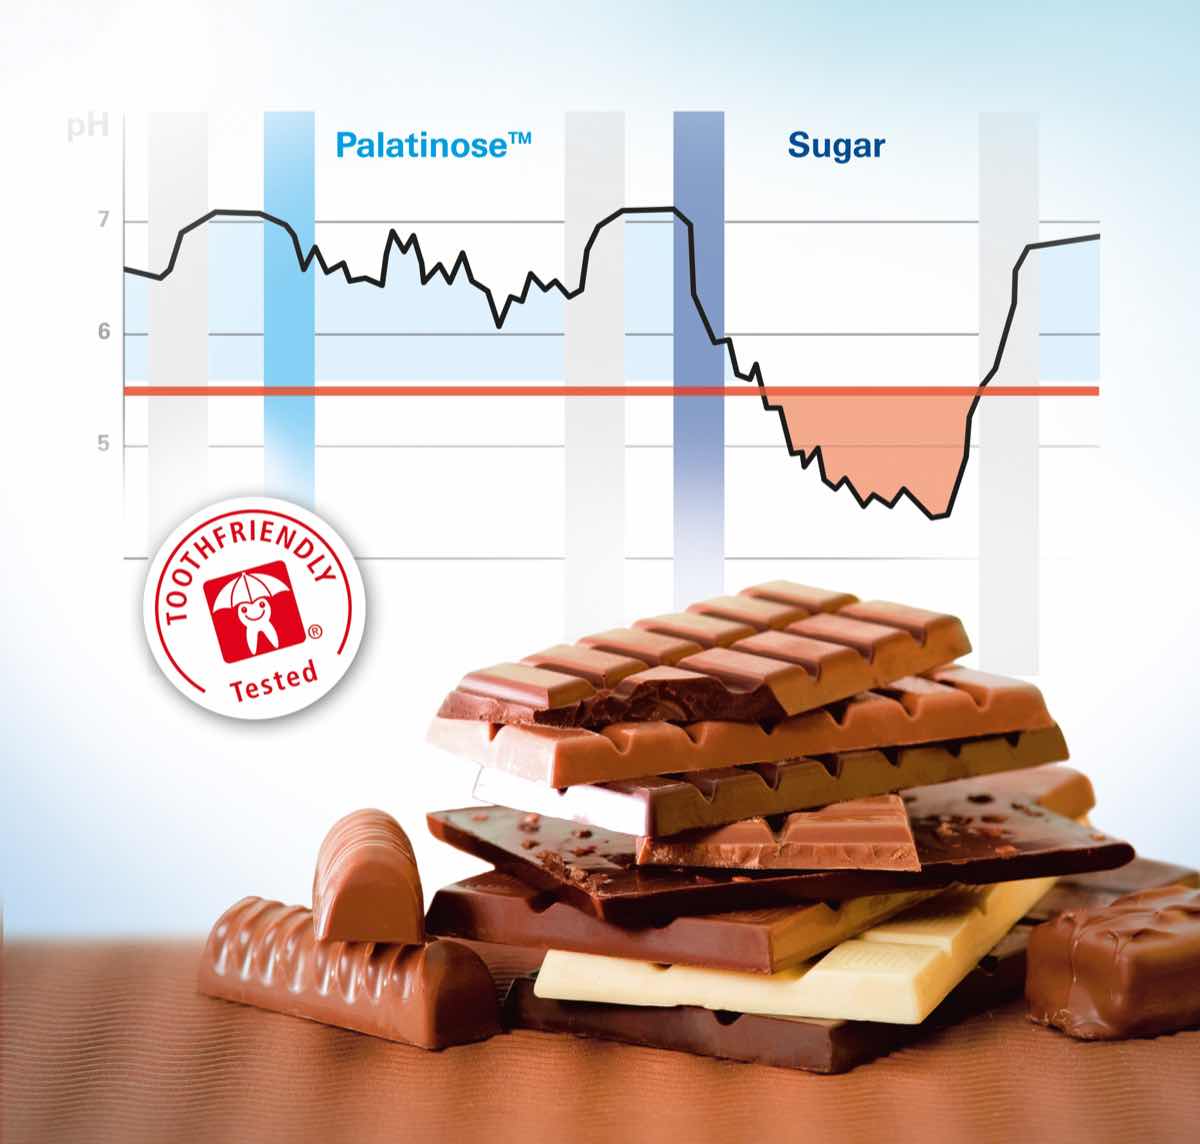 Consumers want tooth-friendly chocolate, says Beneo